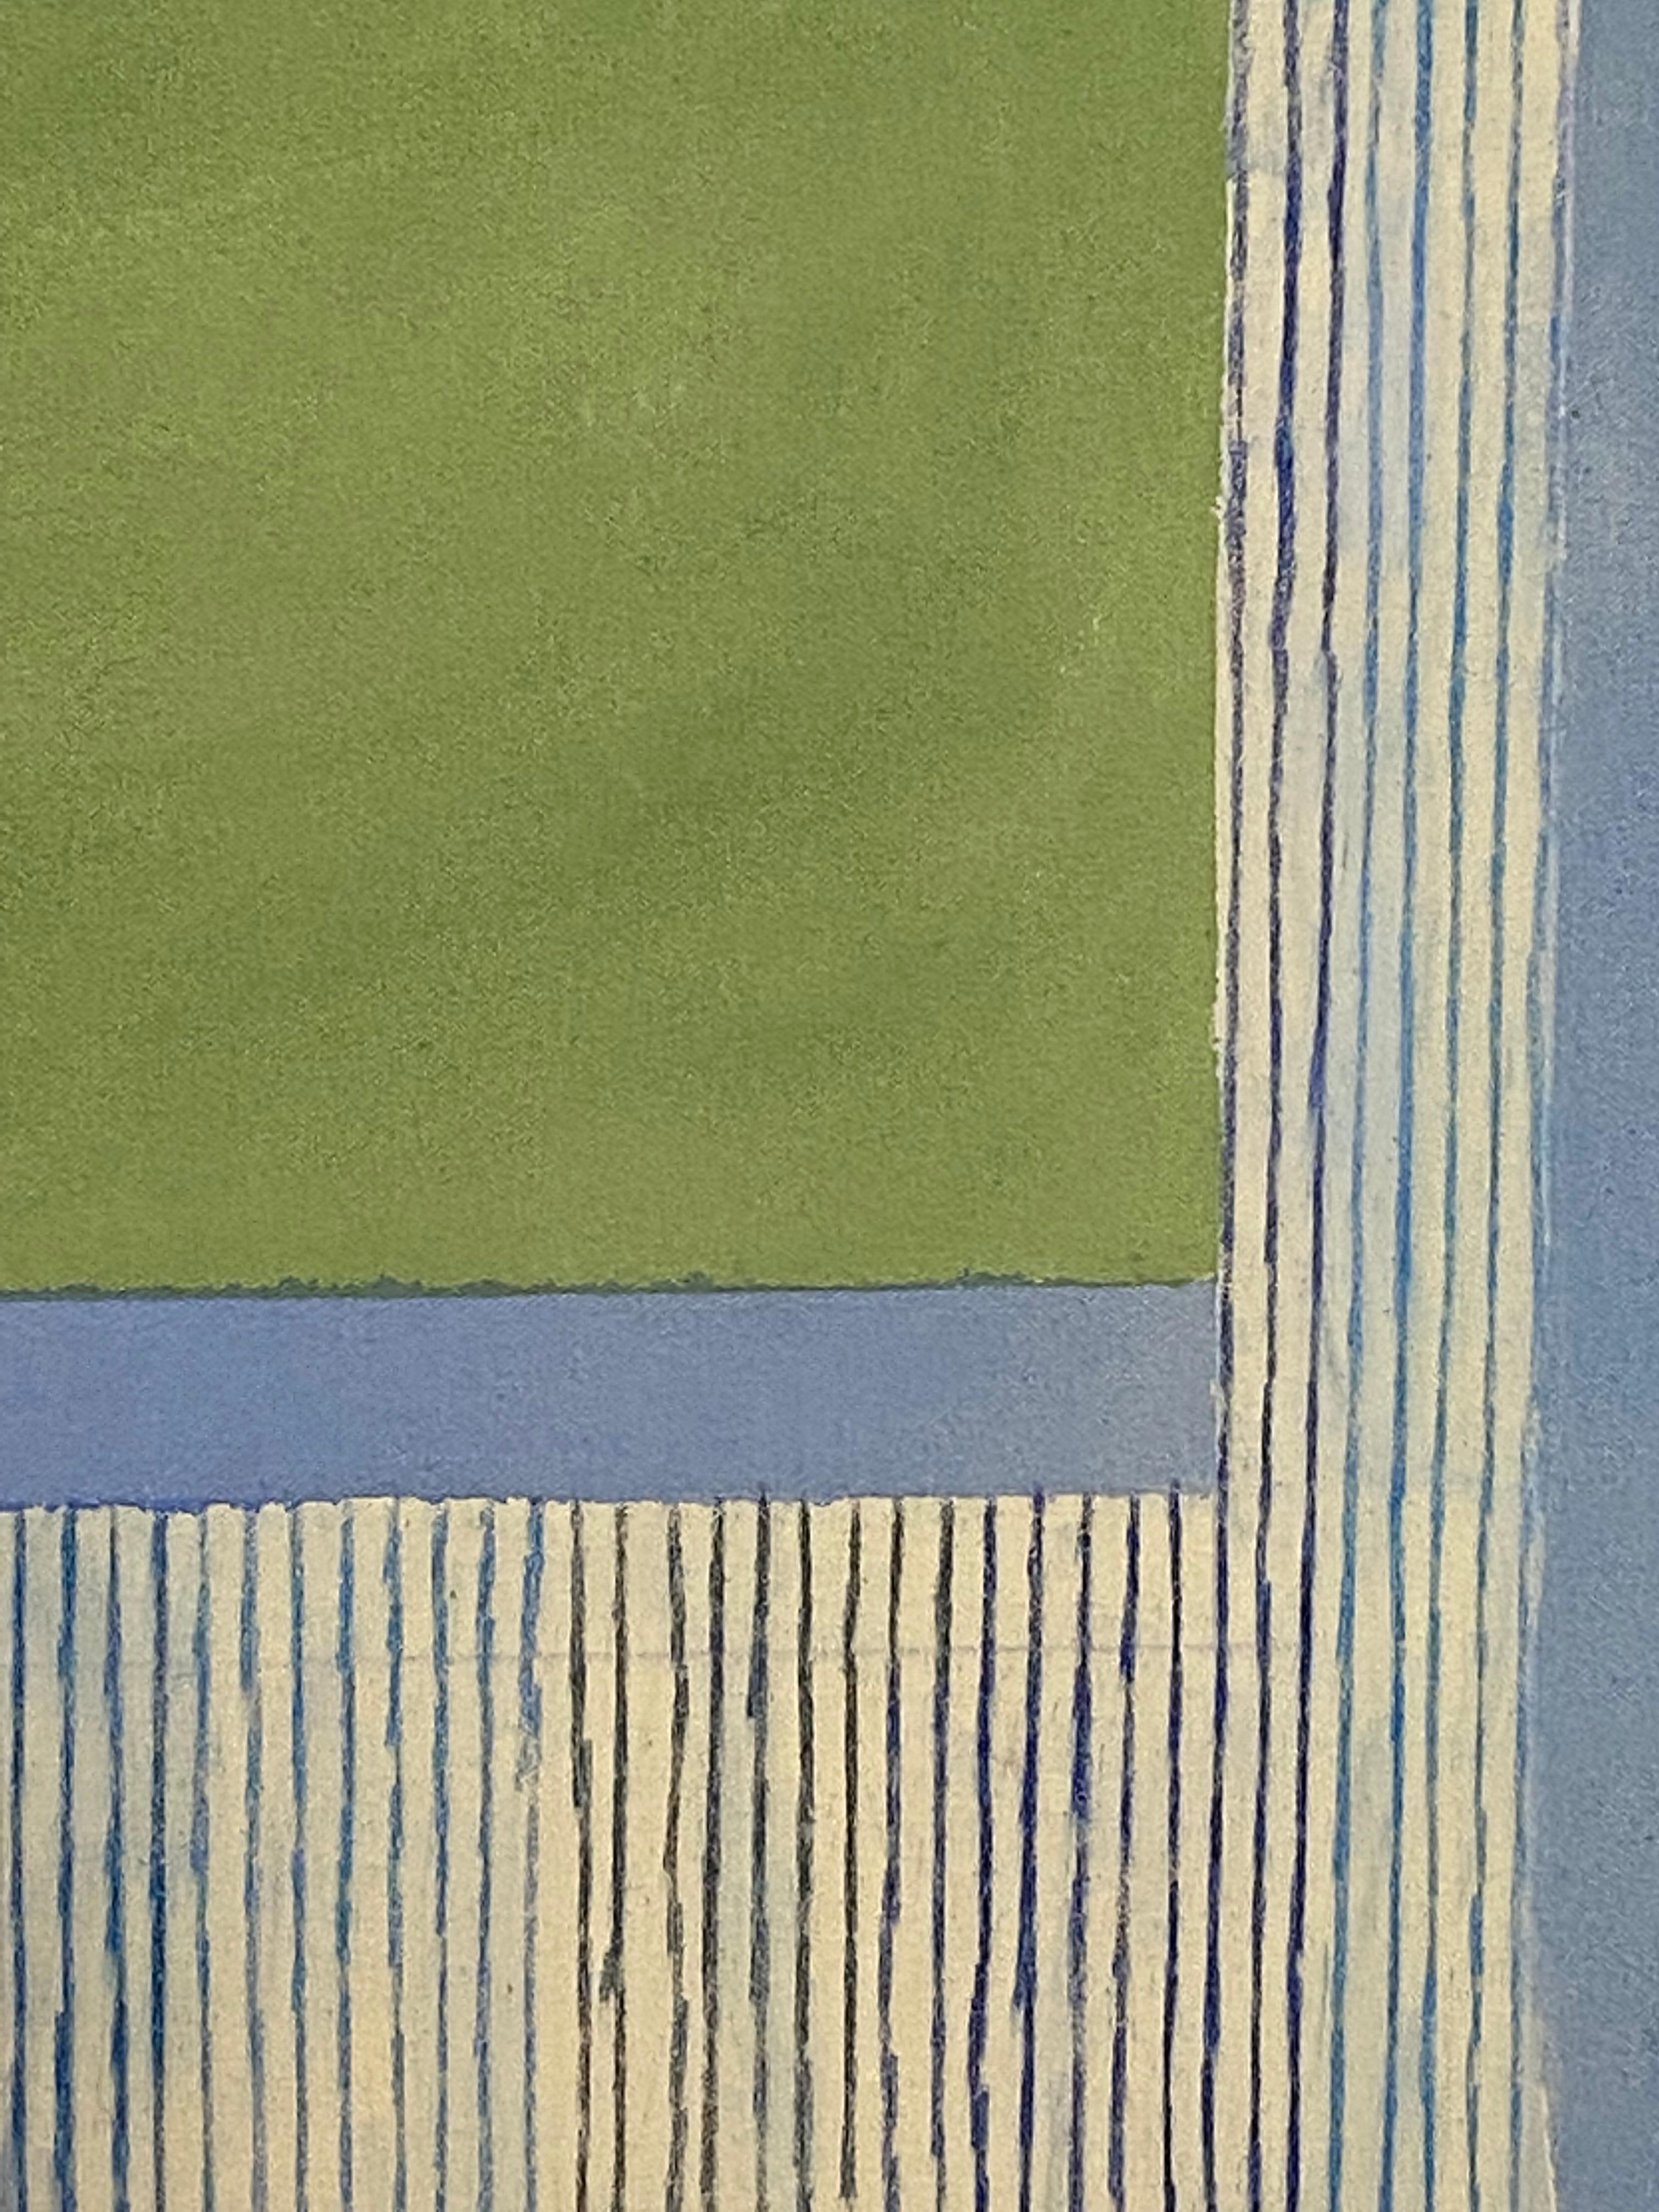 Bluecobalt Green, Light Blue, Grass Green, Stripes, Geometric Abstract Painting For Sale 6